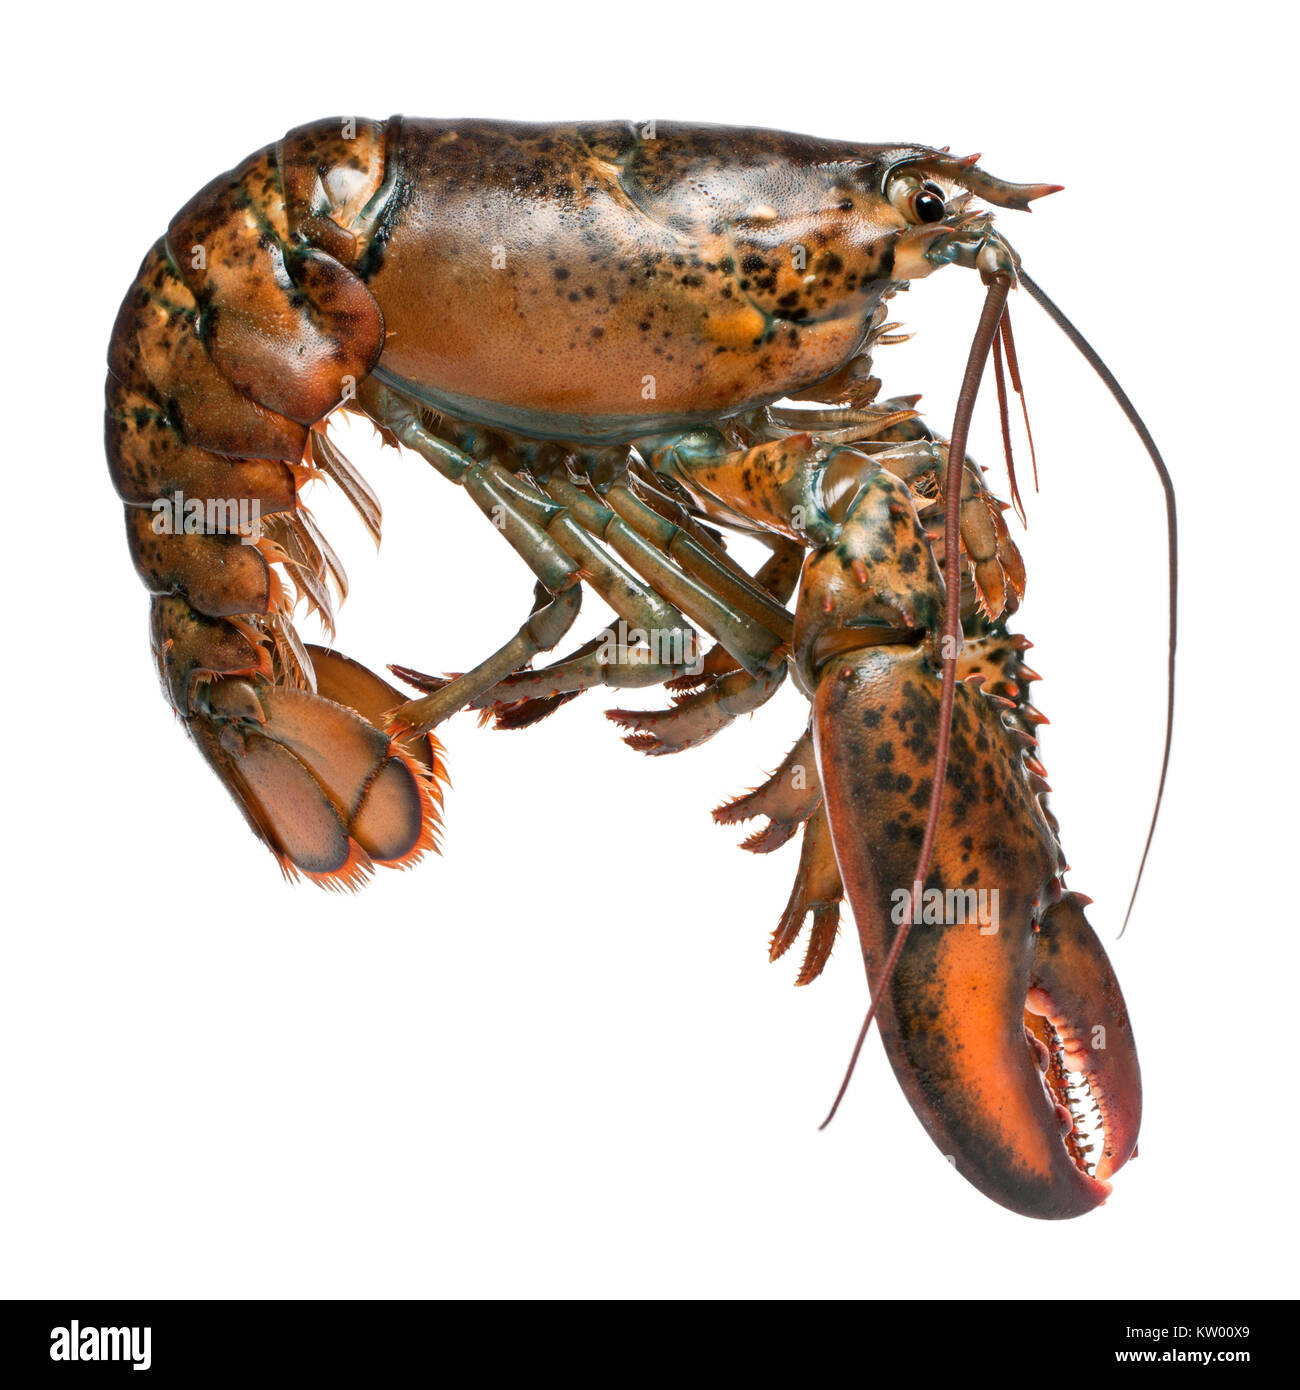 American lobster, Homarus americanus, in front of white background Stock Photo